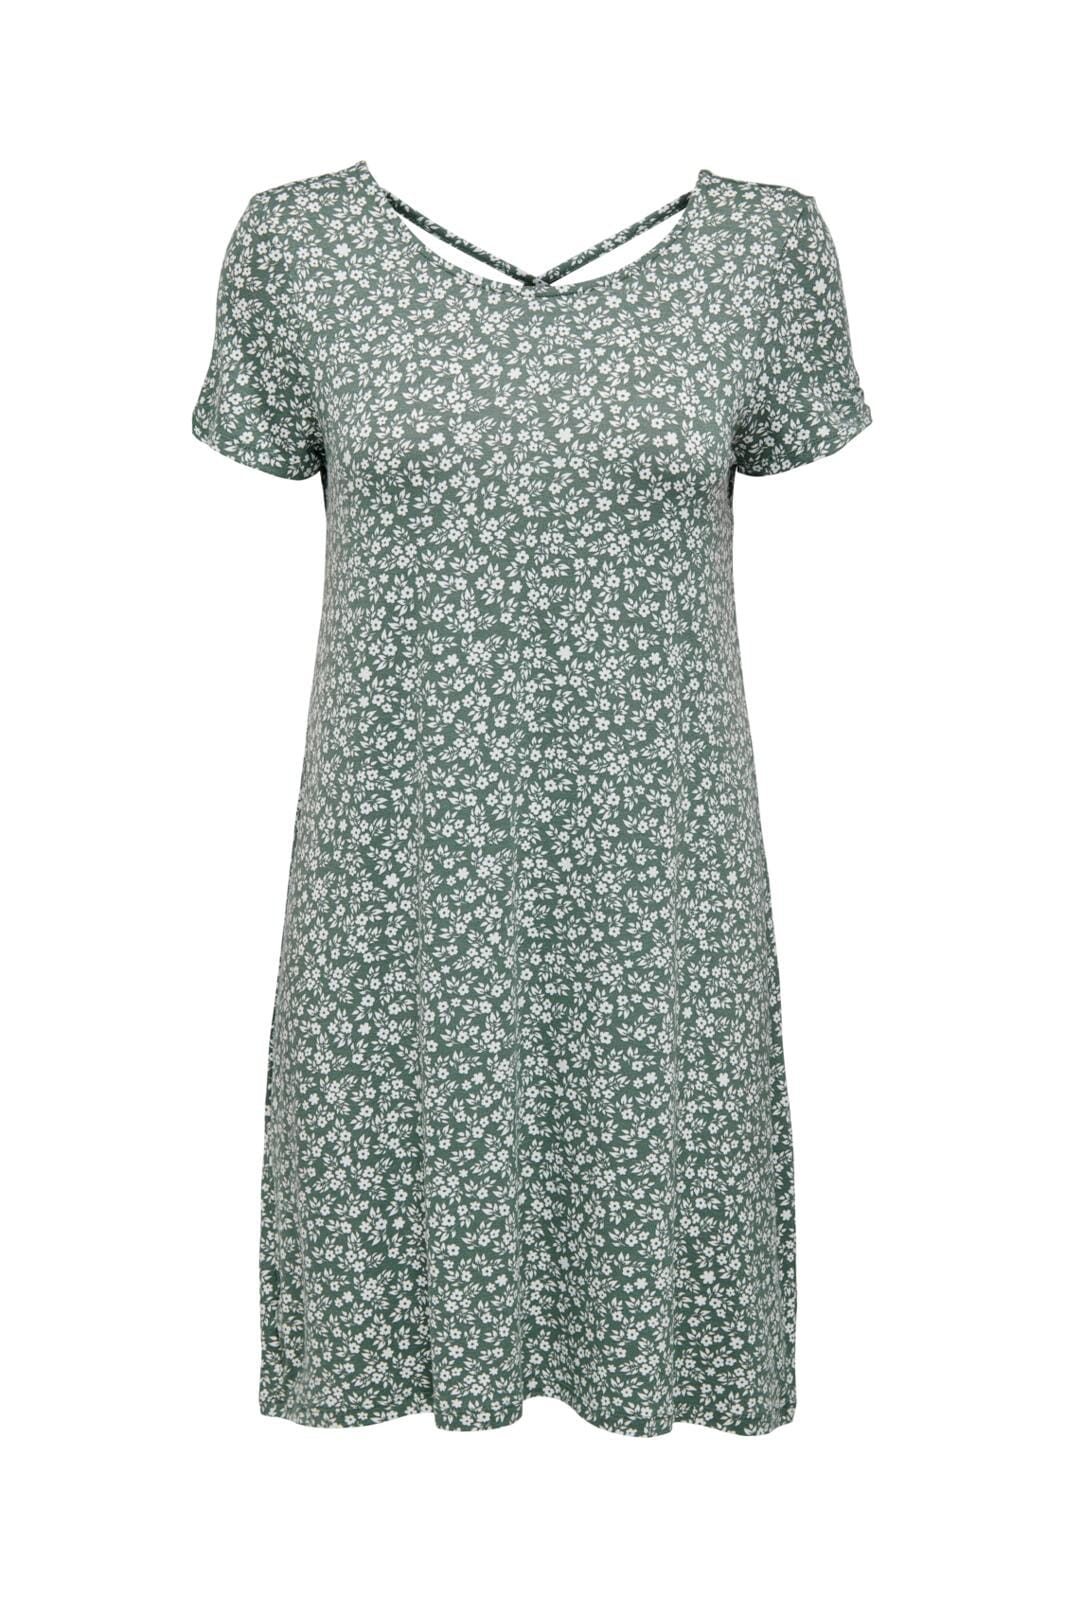 Only - Onlbera Back Lace Up S/S Dress - 3516097 Balsam Green White Flowers